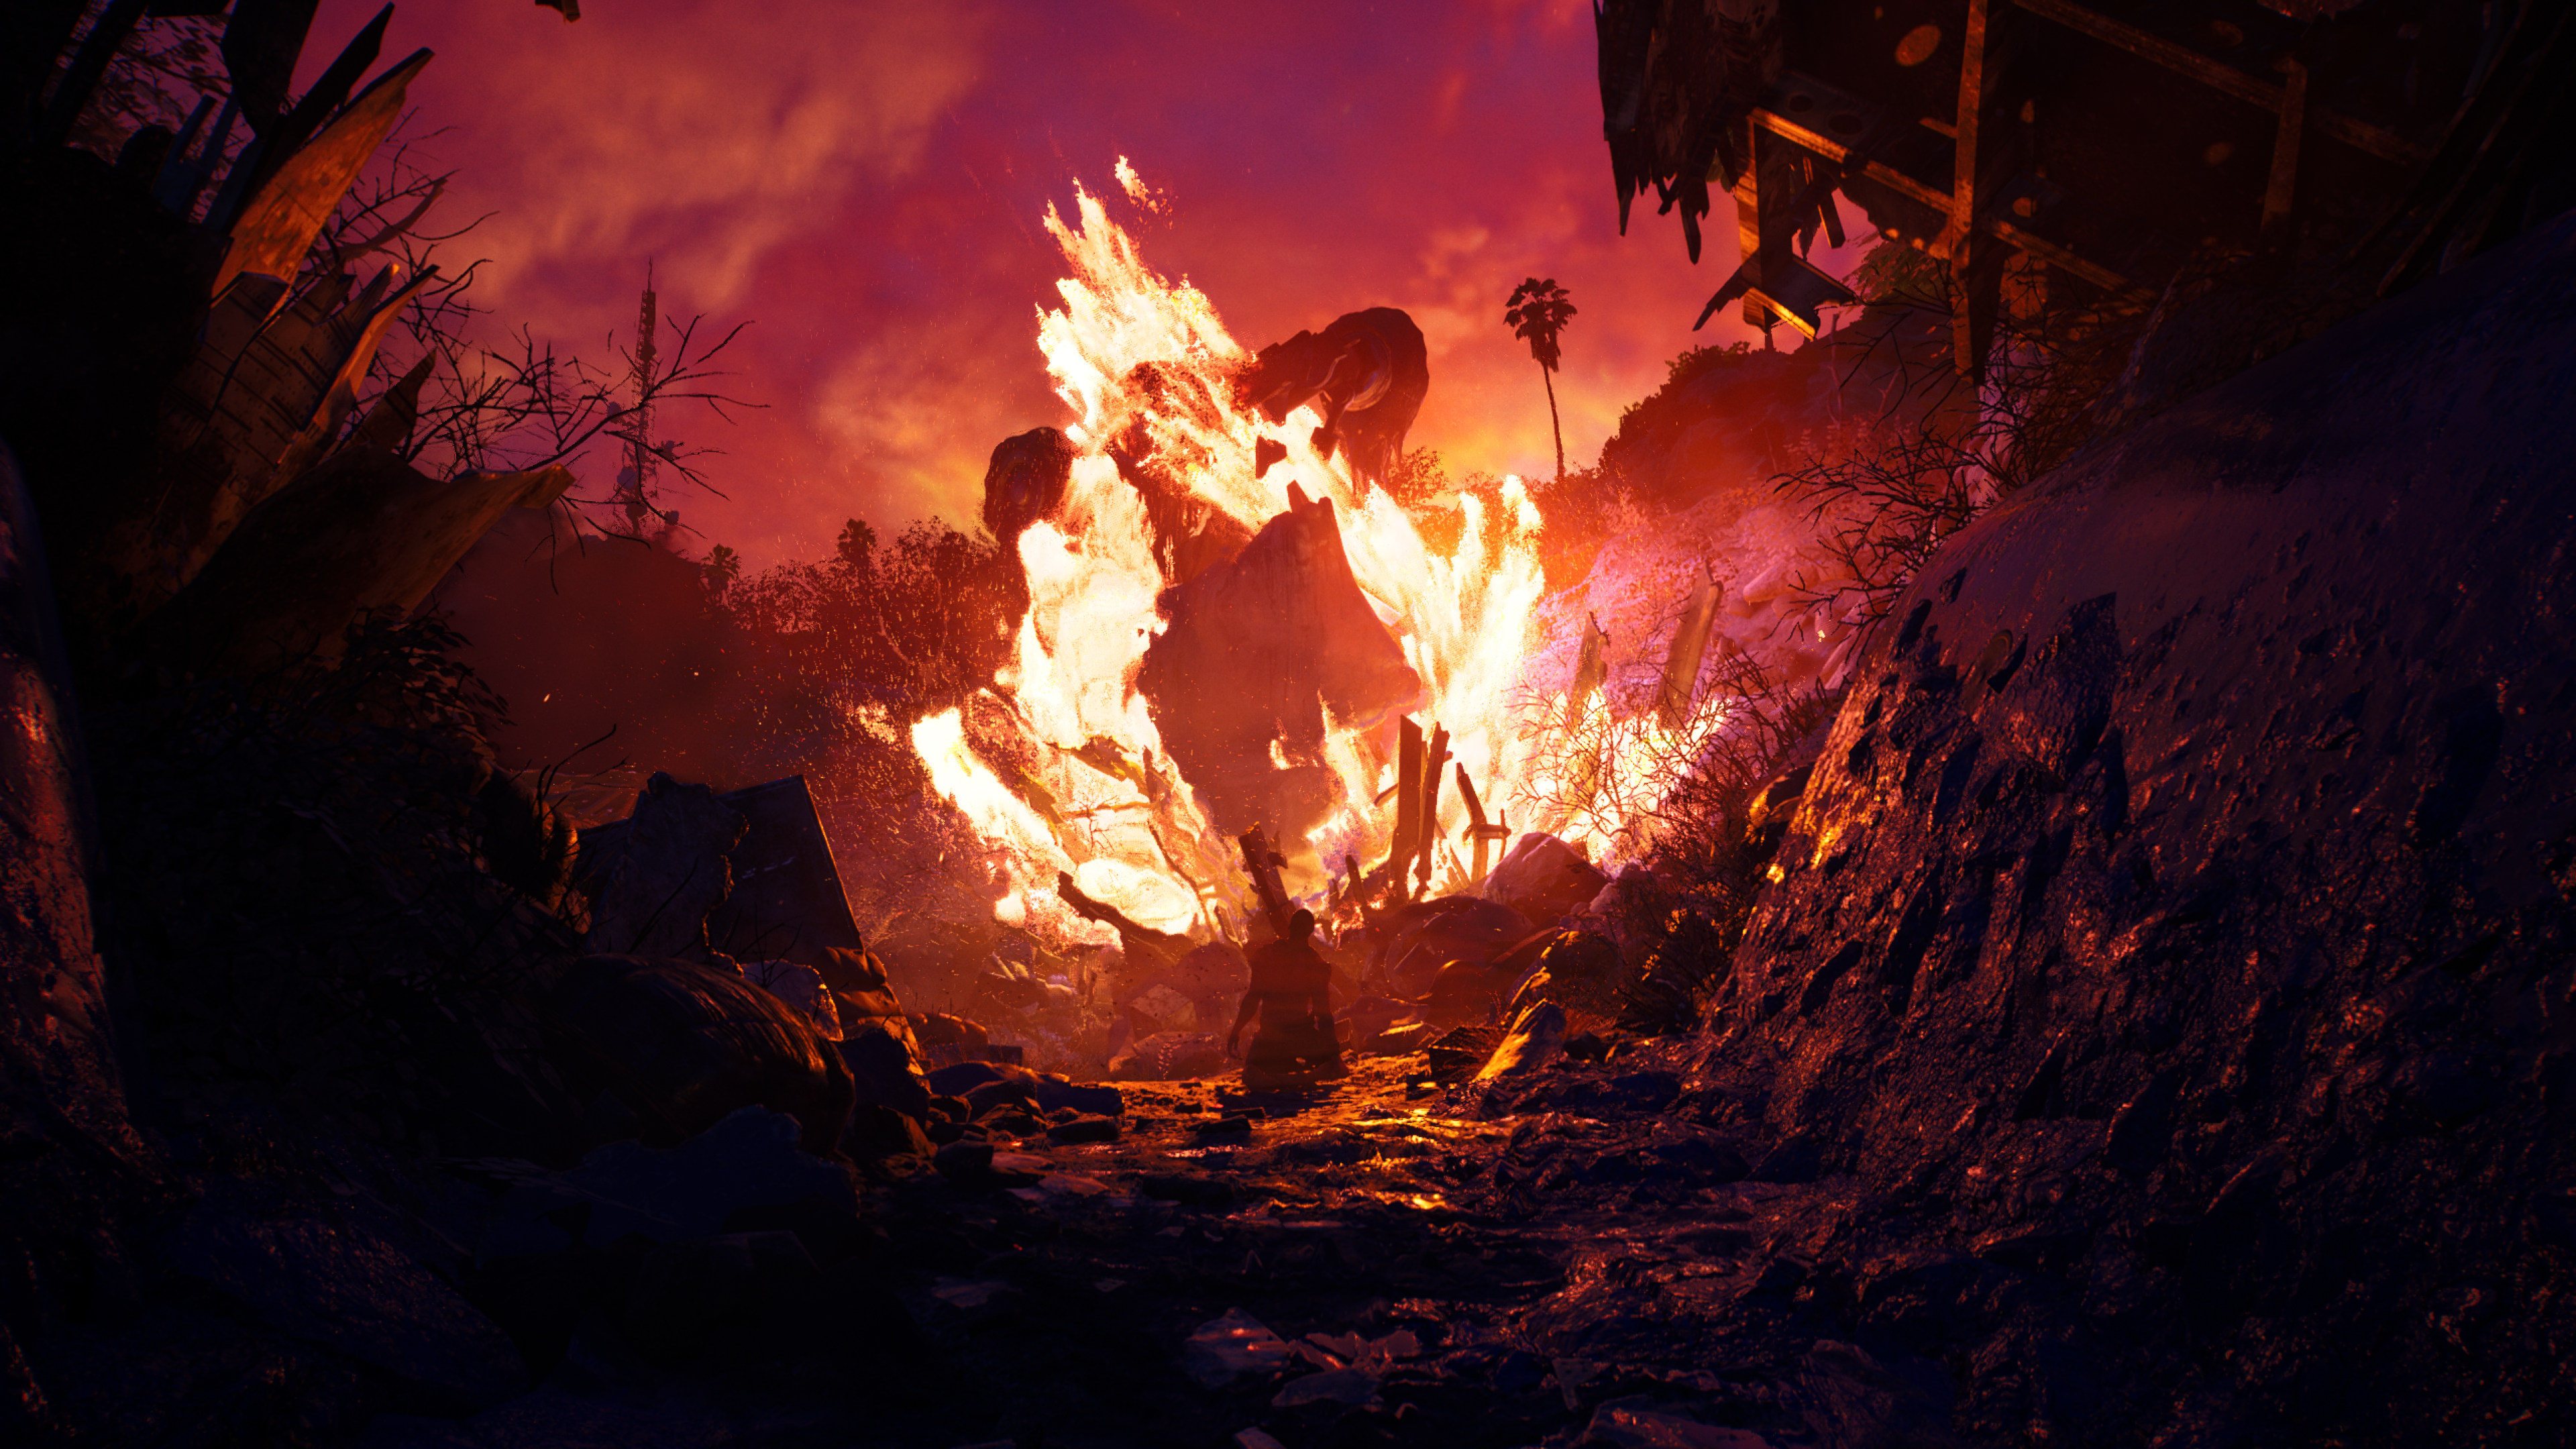 A huge chunk of flaming airplane wreckage in a crash site in Dead Island 2